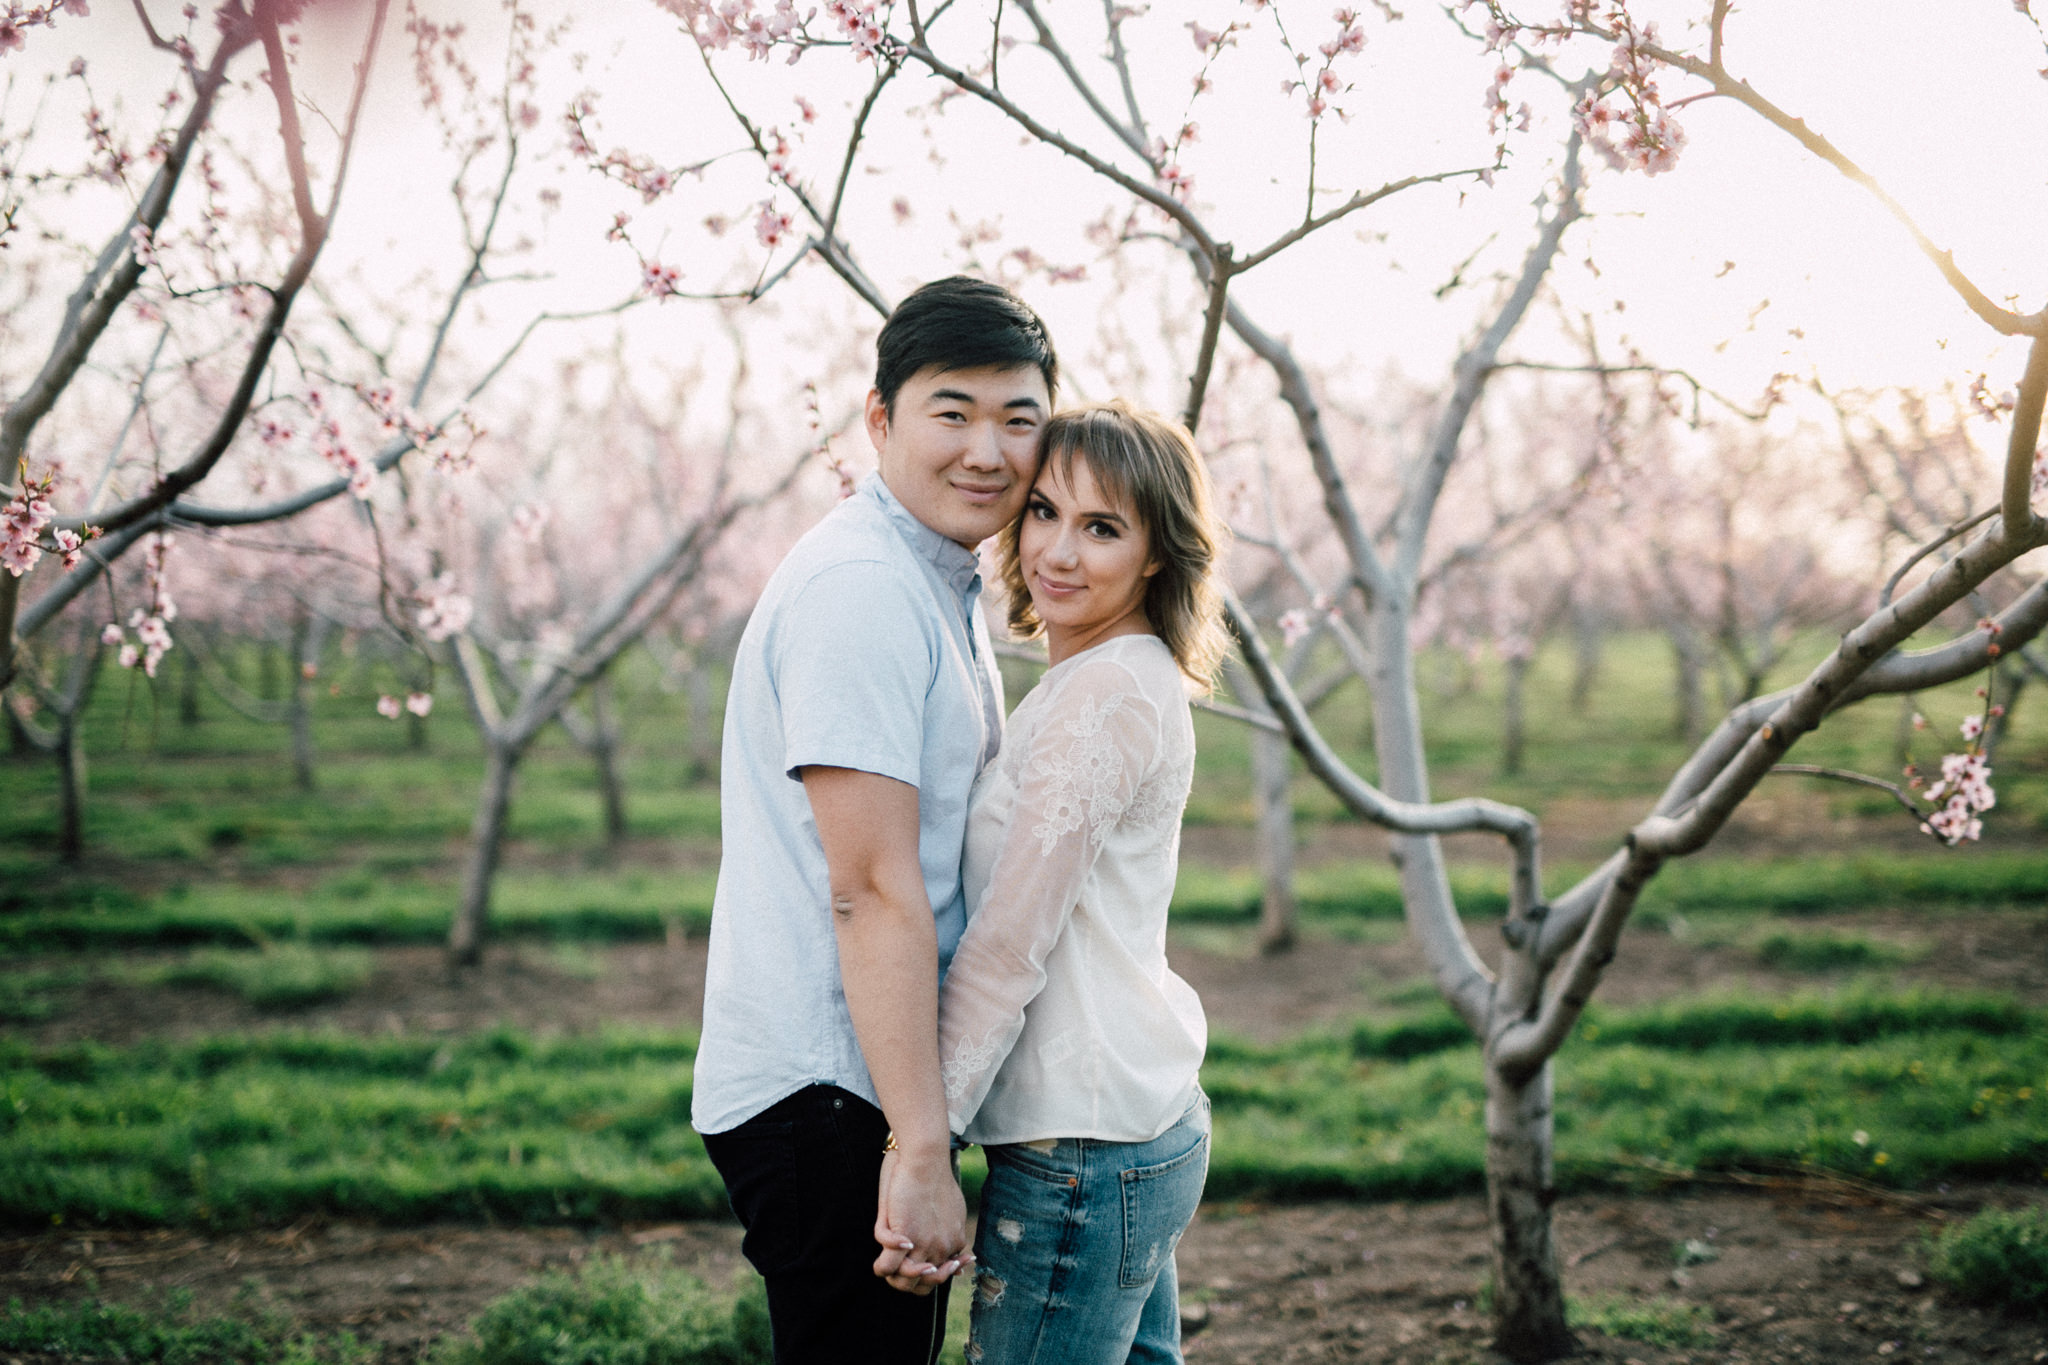 Niagara-Portrait-Session-Niagara-On-The-Lake-Cherry-Blossoms-photography-by-Simply-Lace-Photography-091.JPG